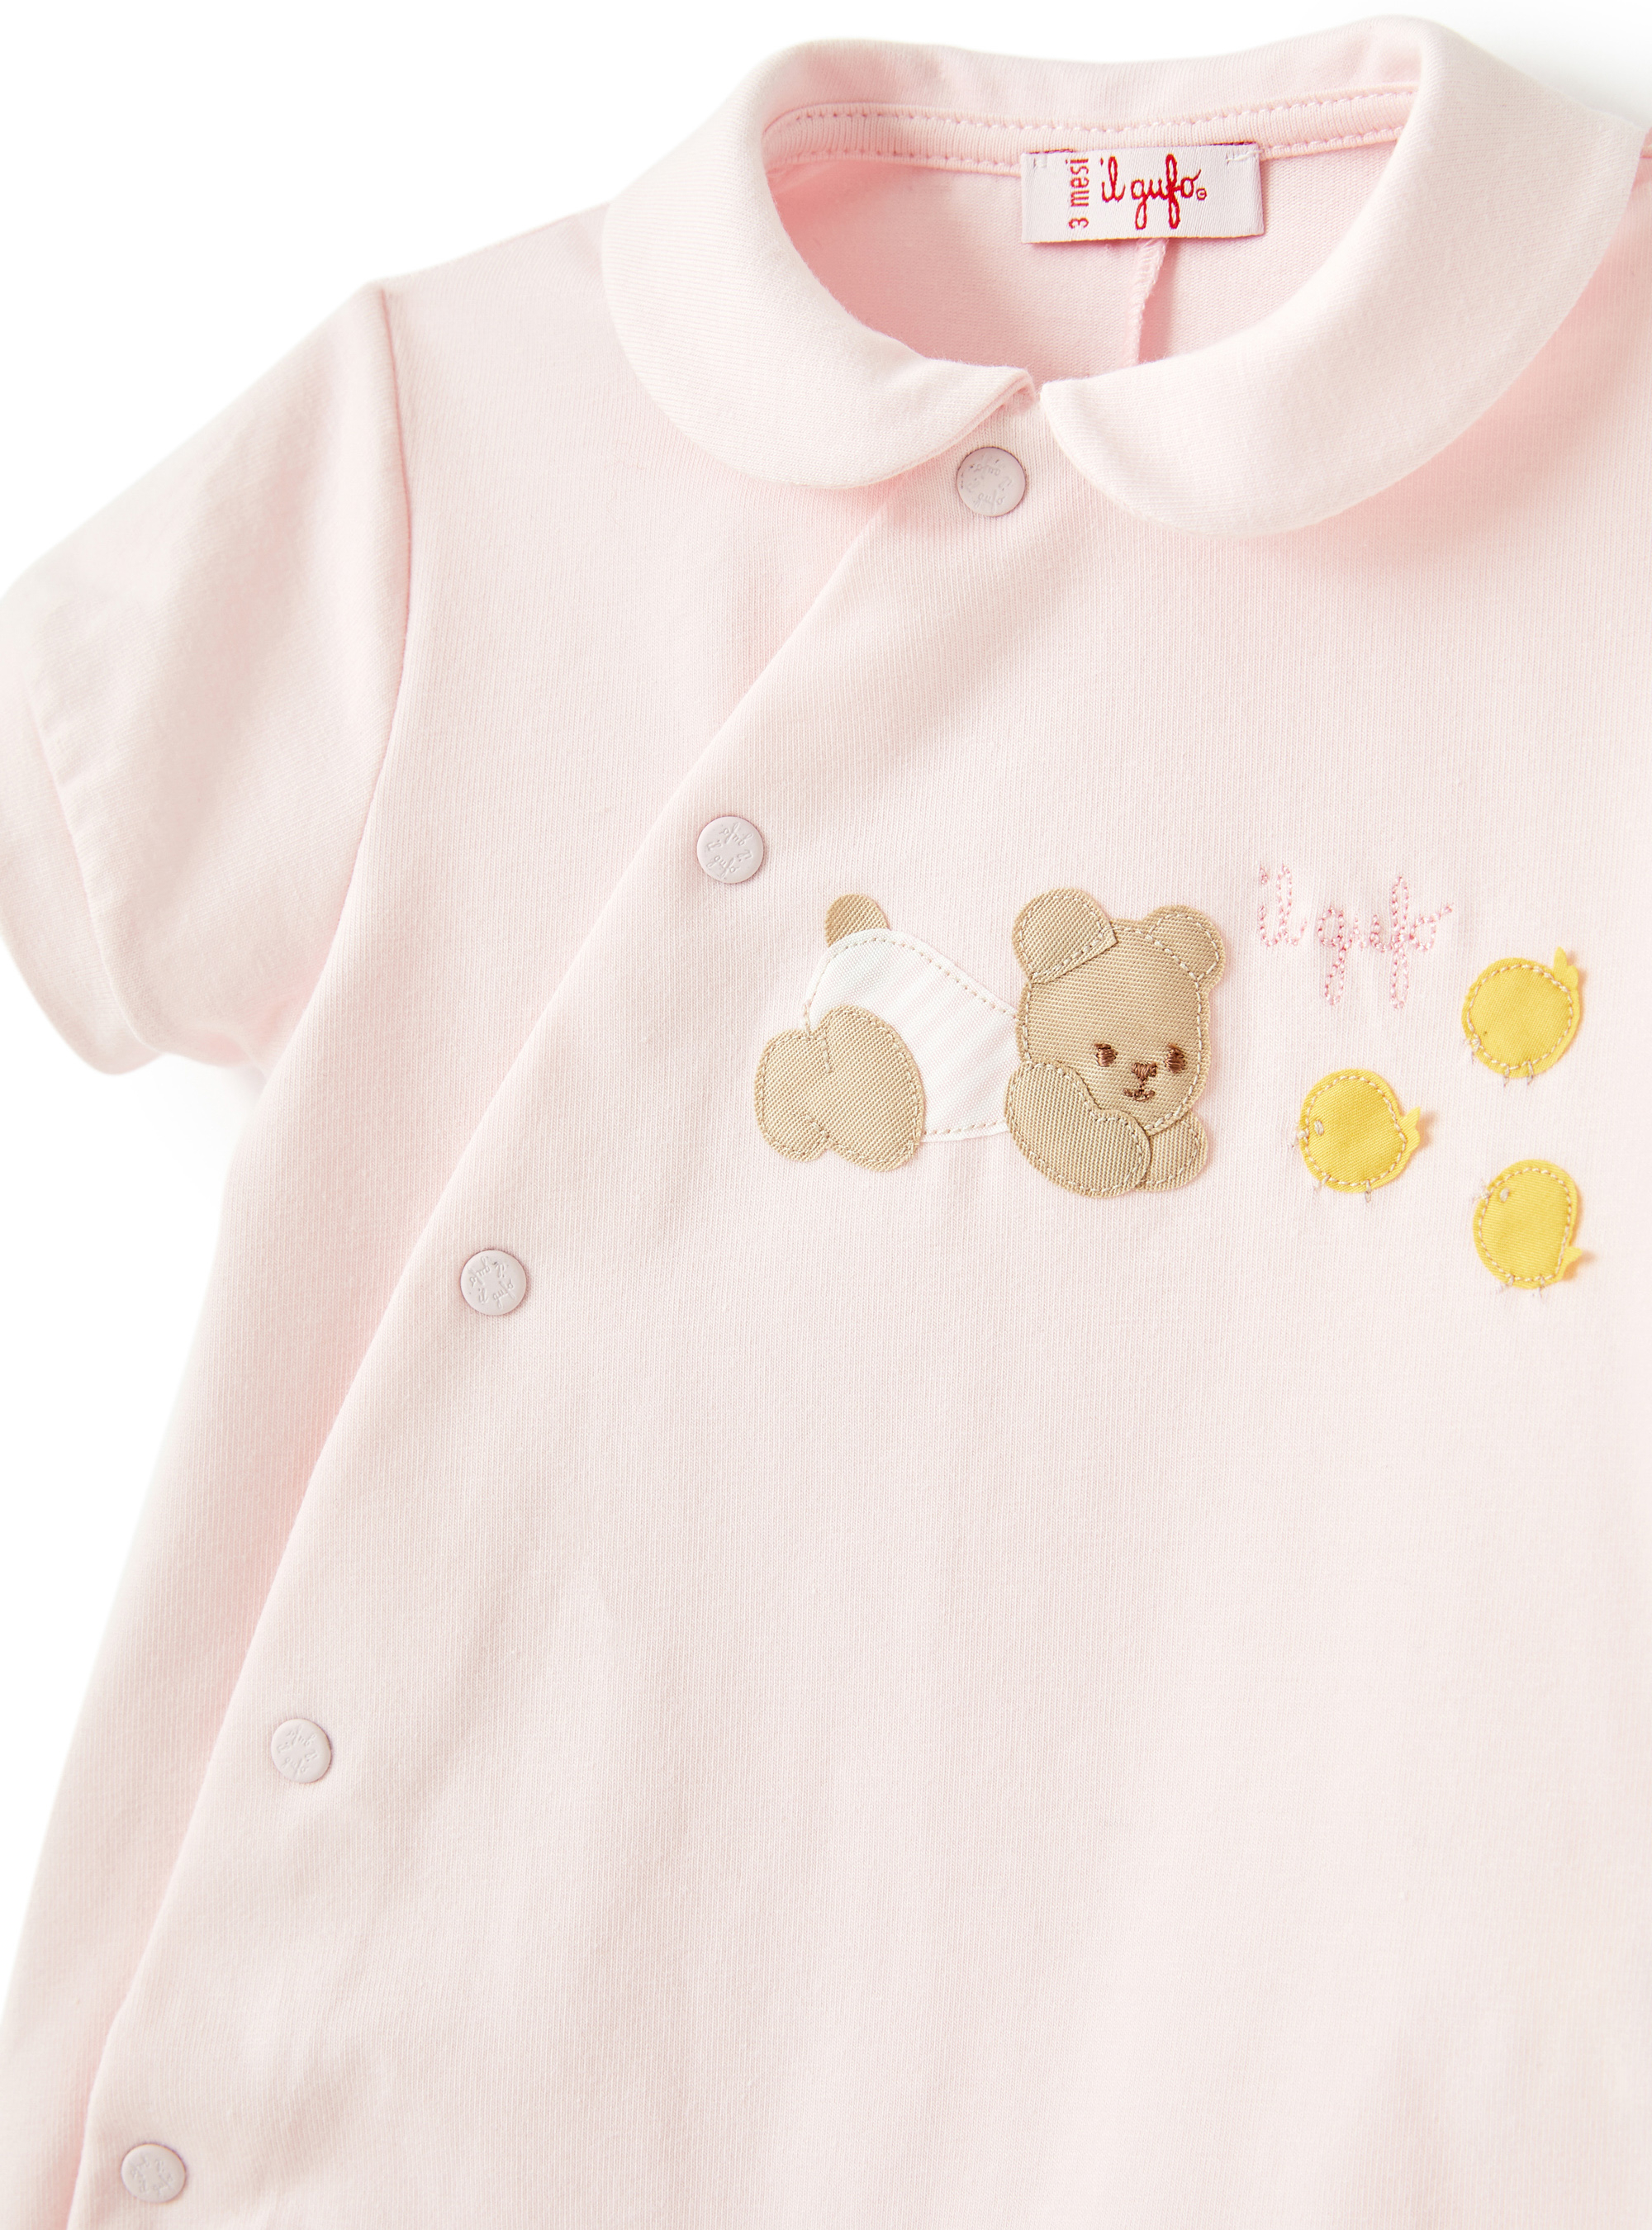 Pink romper with bear application - Pink | Il Gufo